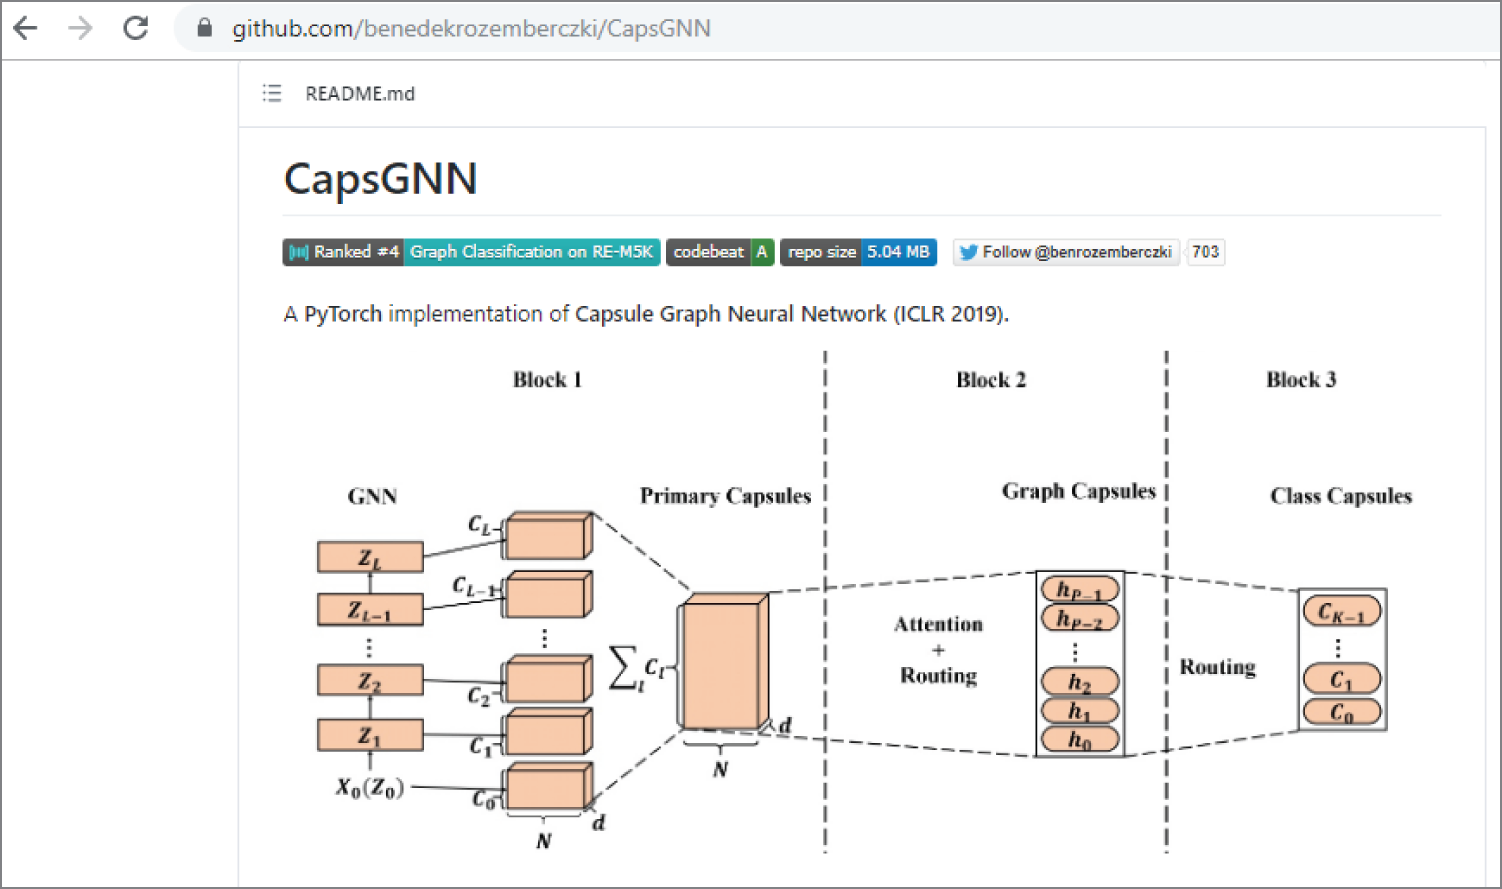 Snapshot of a PyTorch implementation of a capsule graph neural network.